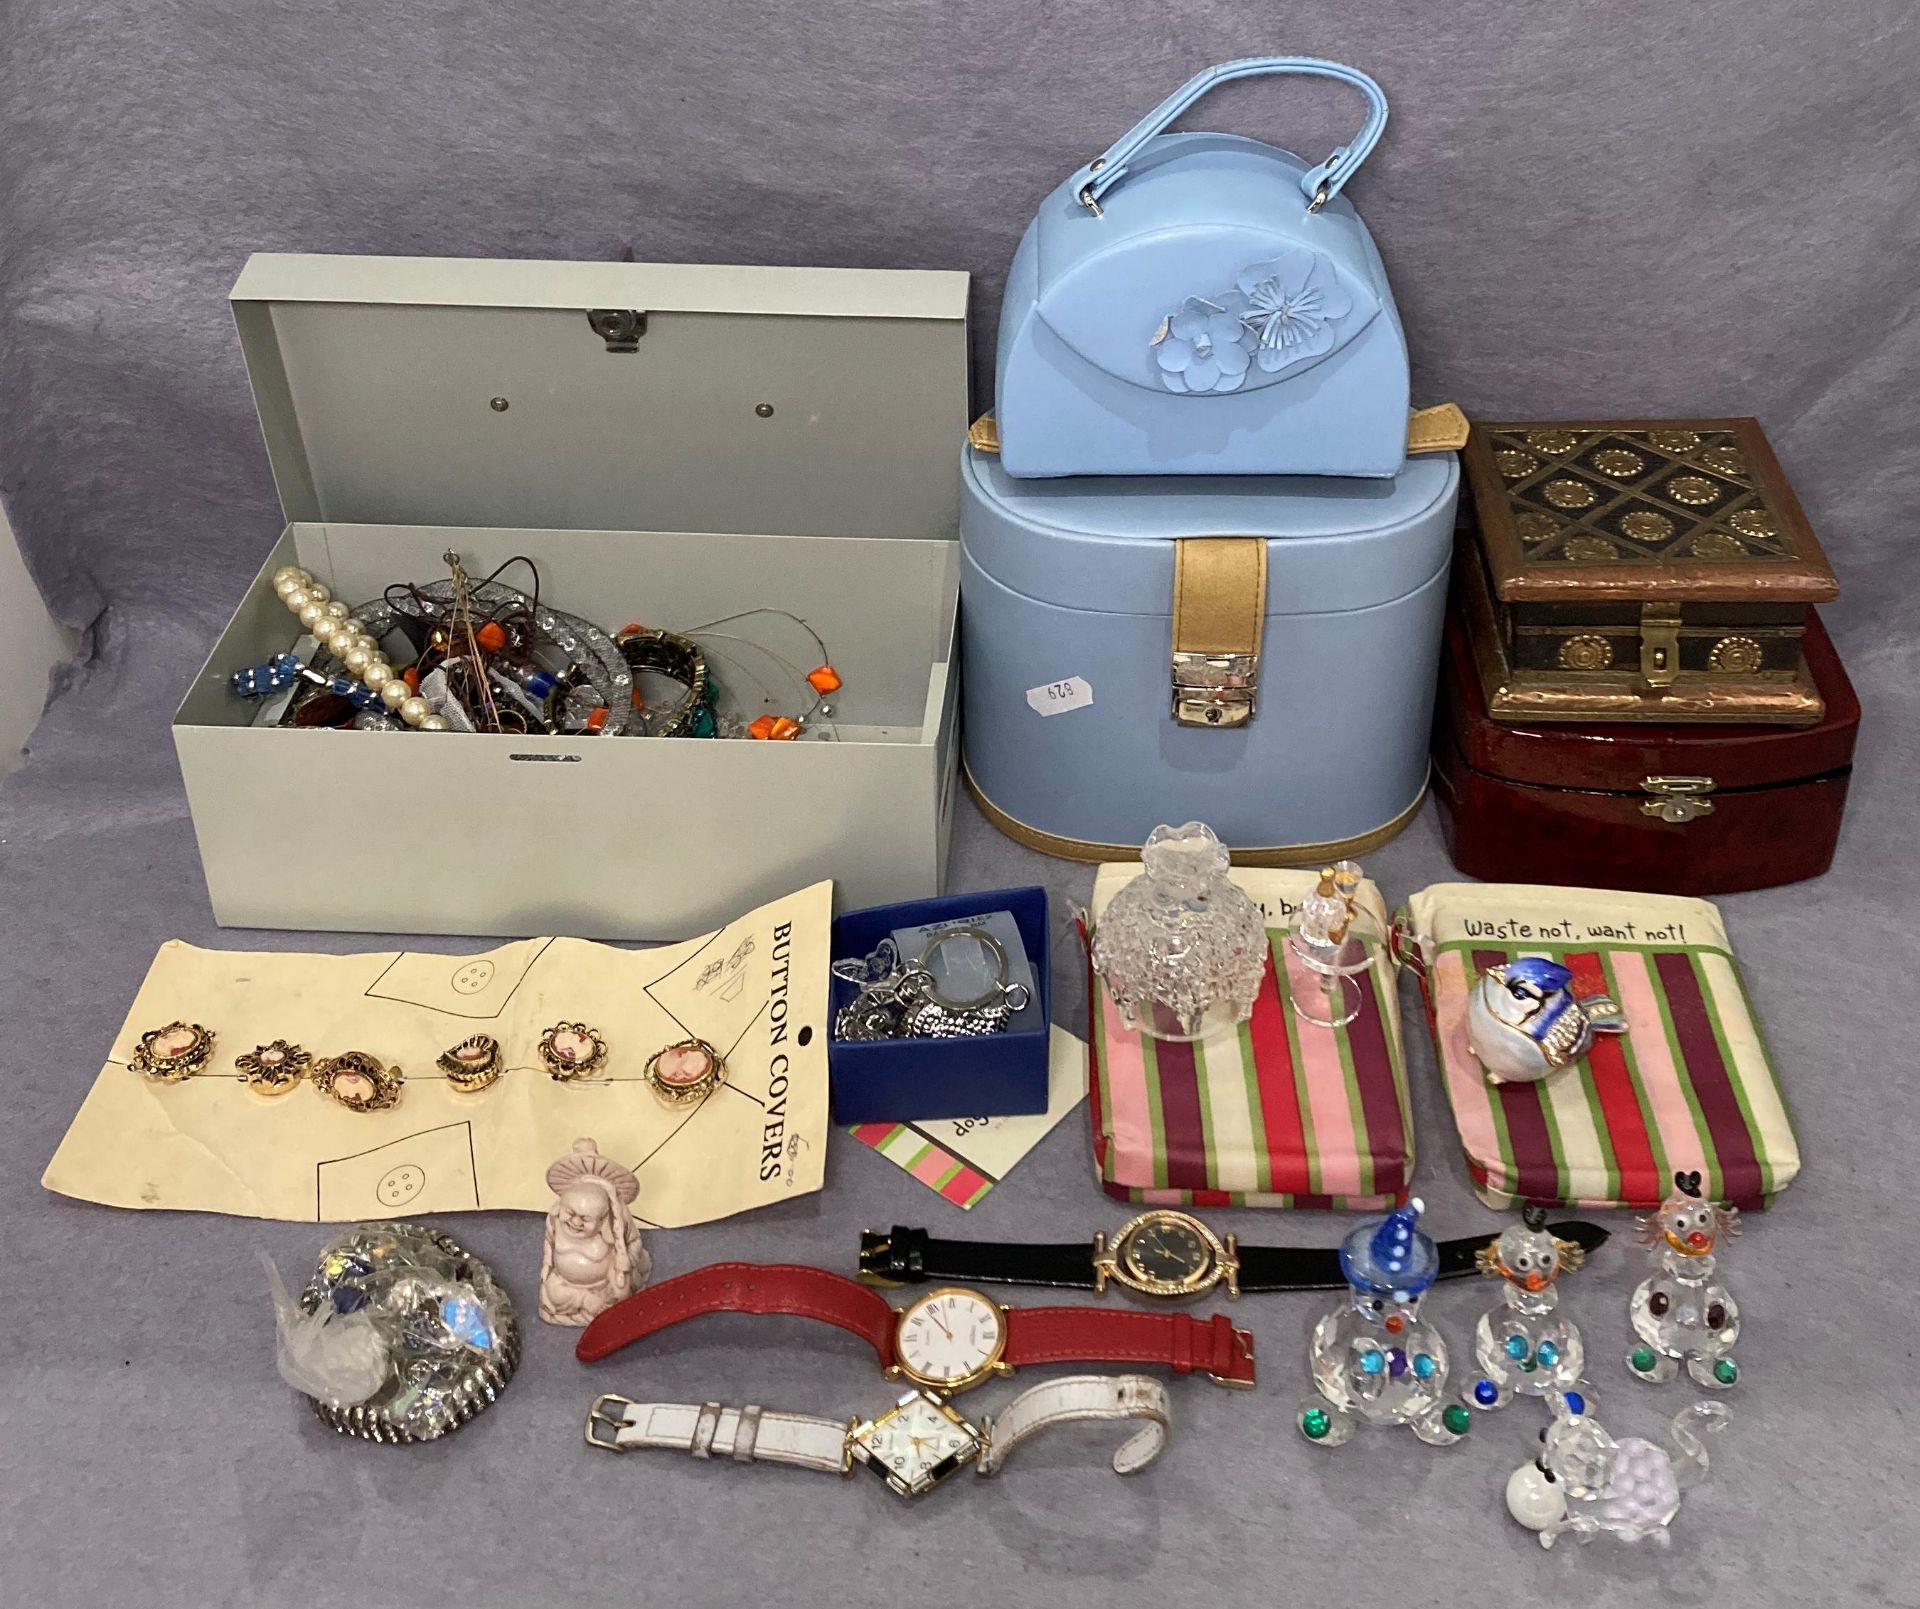 Contents to basket - assorted costume jewellery including watches, brooches, necklaces,